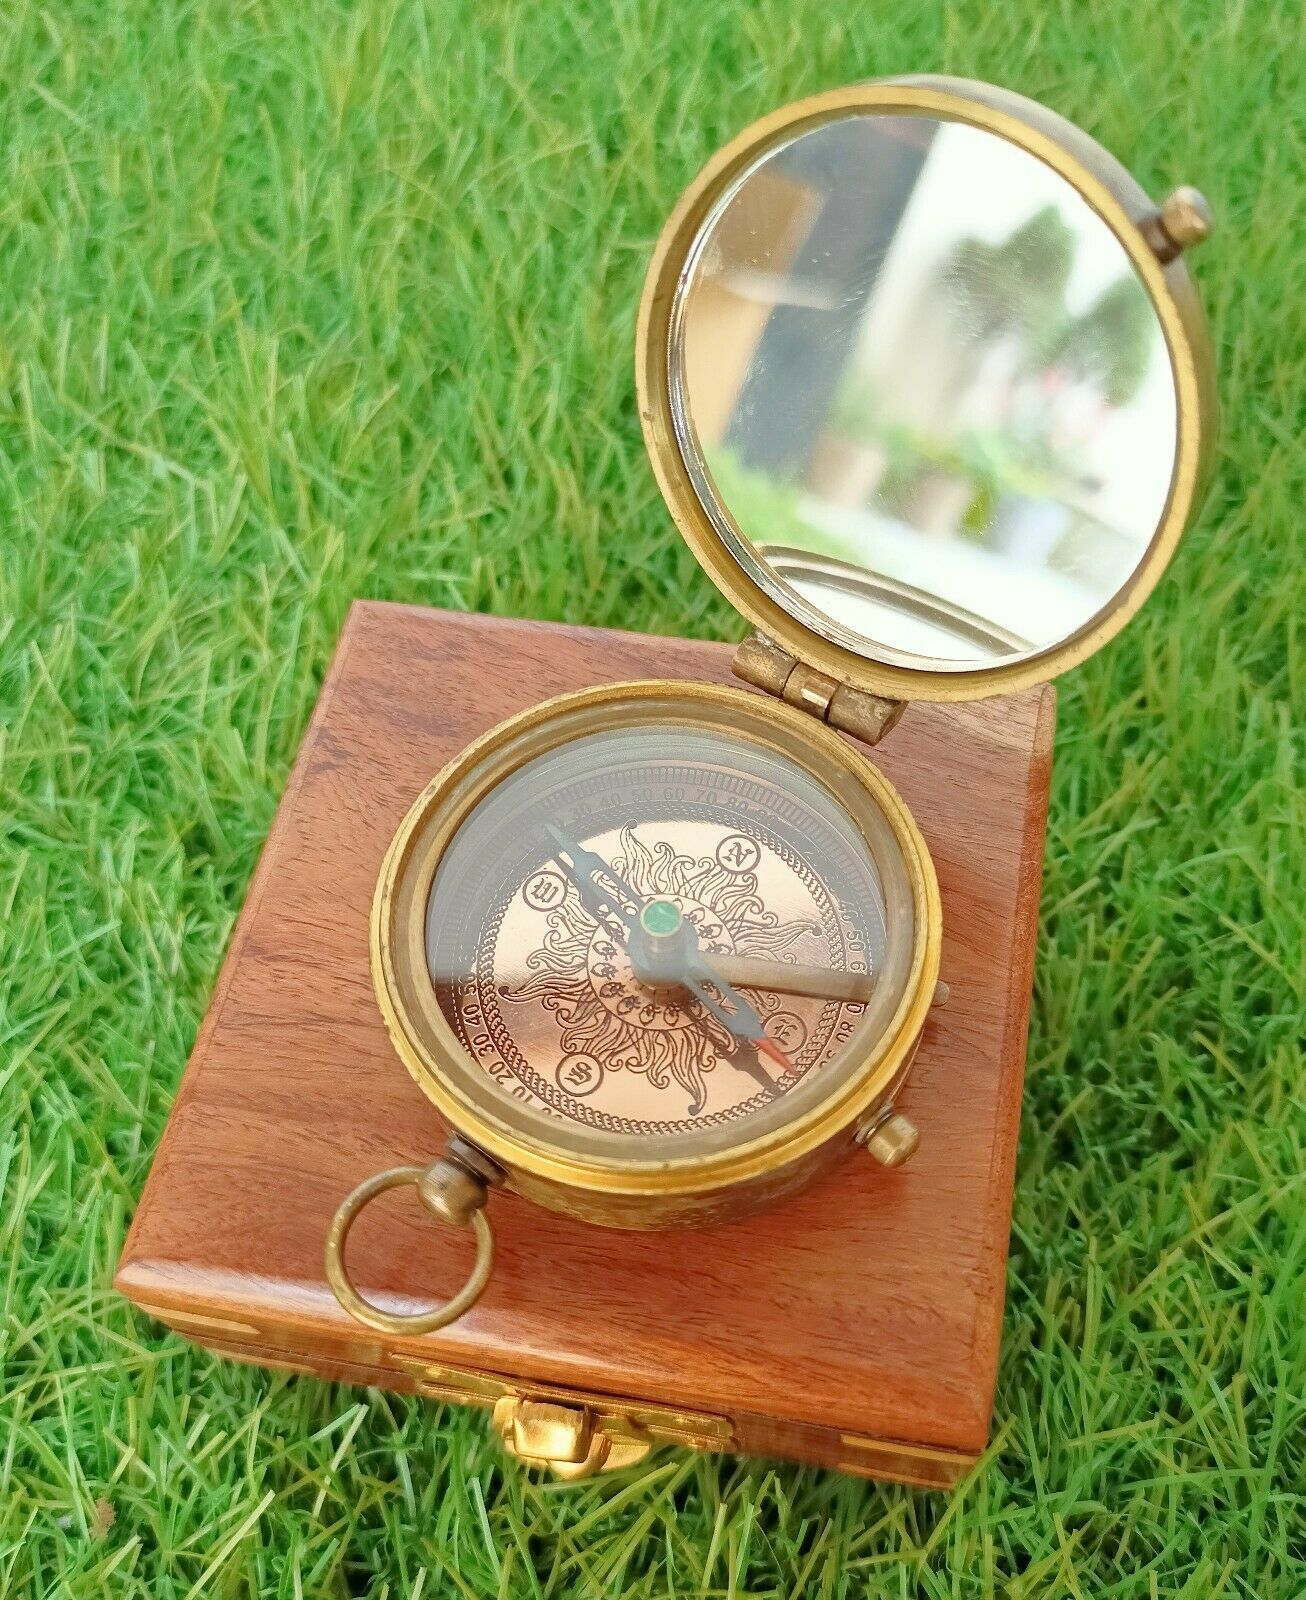 Nautical Brass Marine Locket Compass Collectible With Natural Wooden Box Gift 